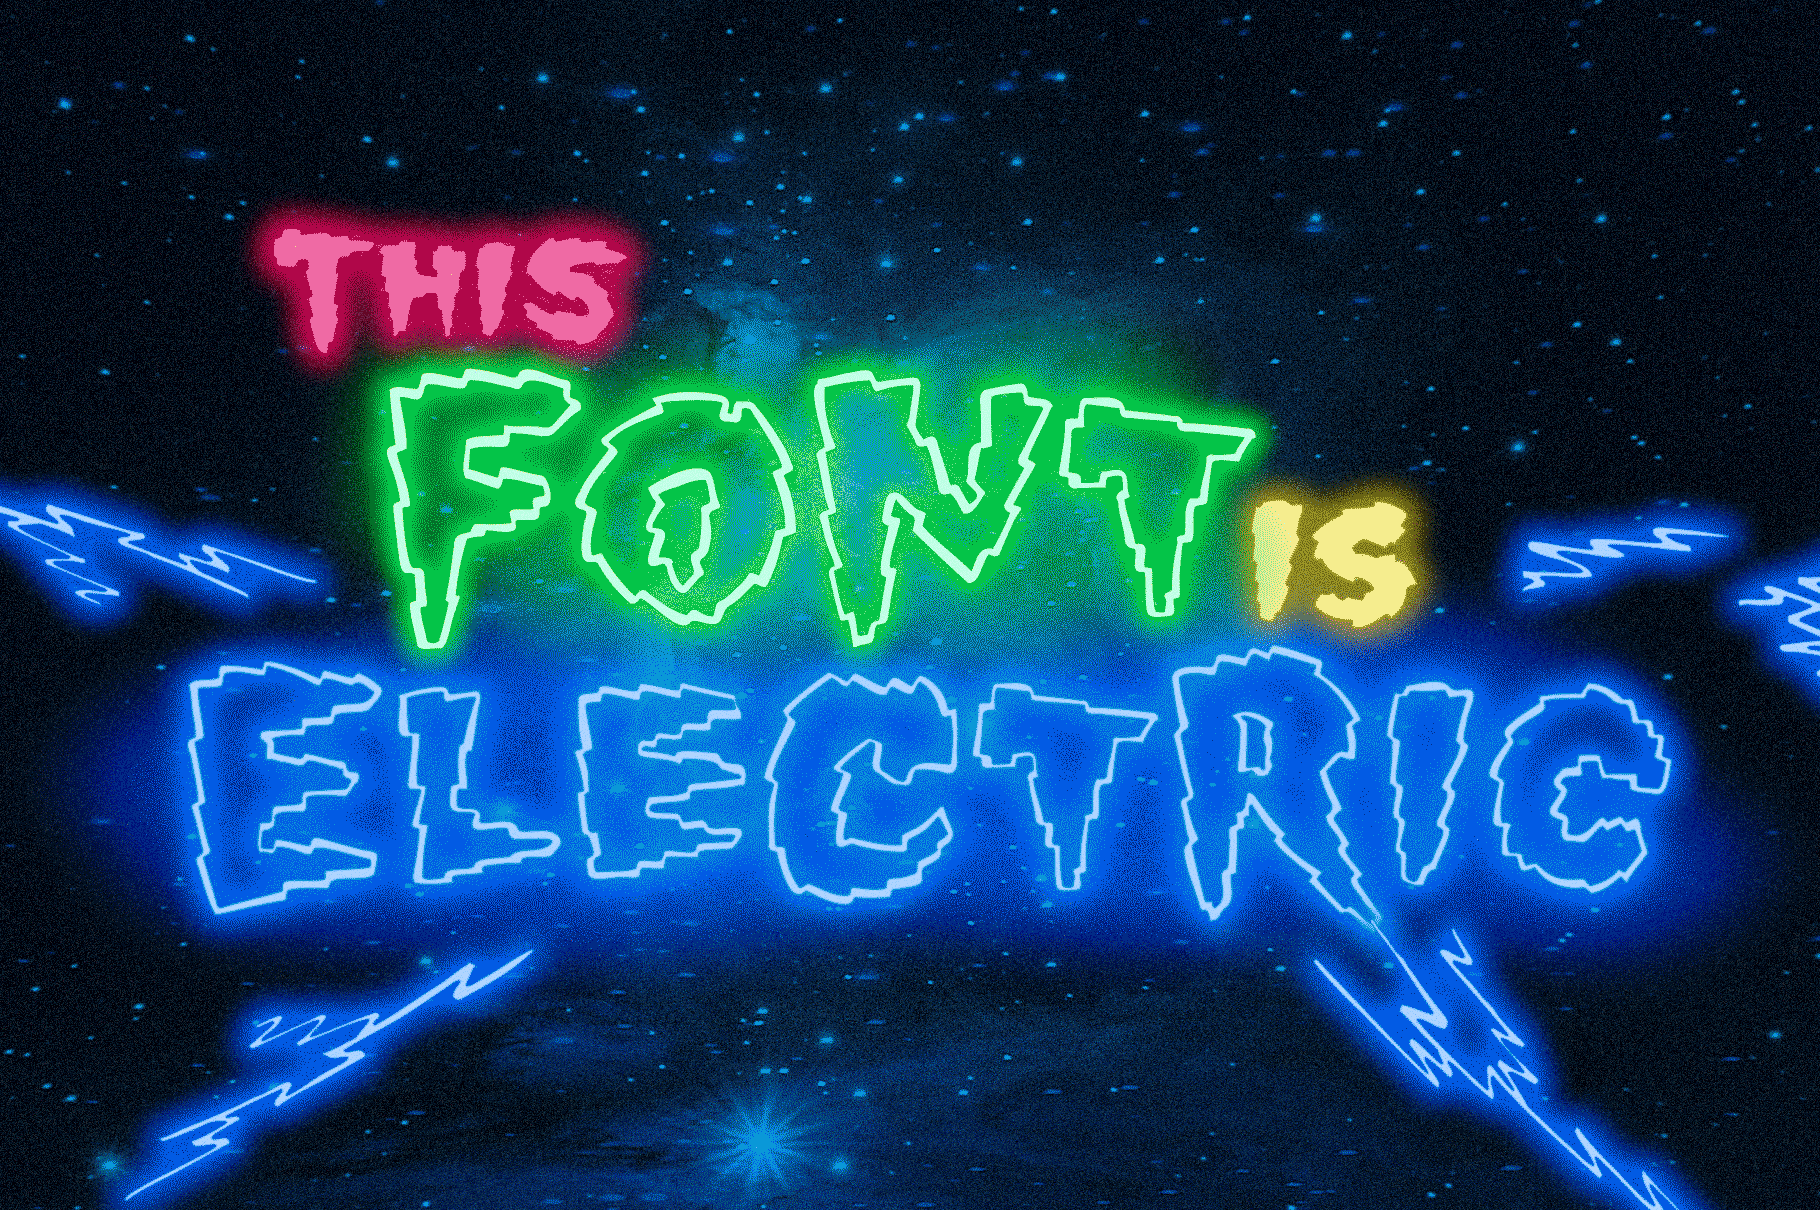 Add an Electric Neon Look to your fonts with these free presets.